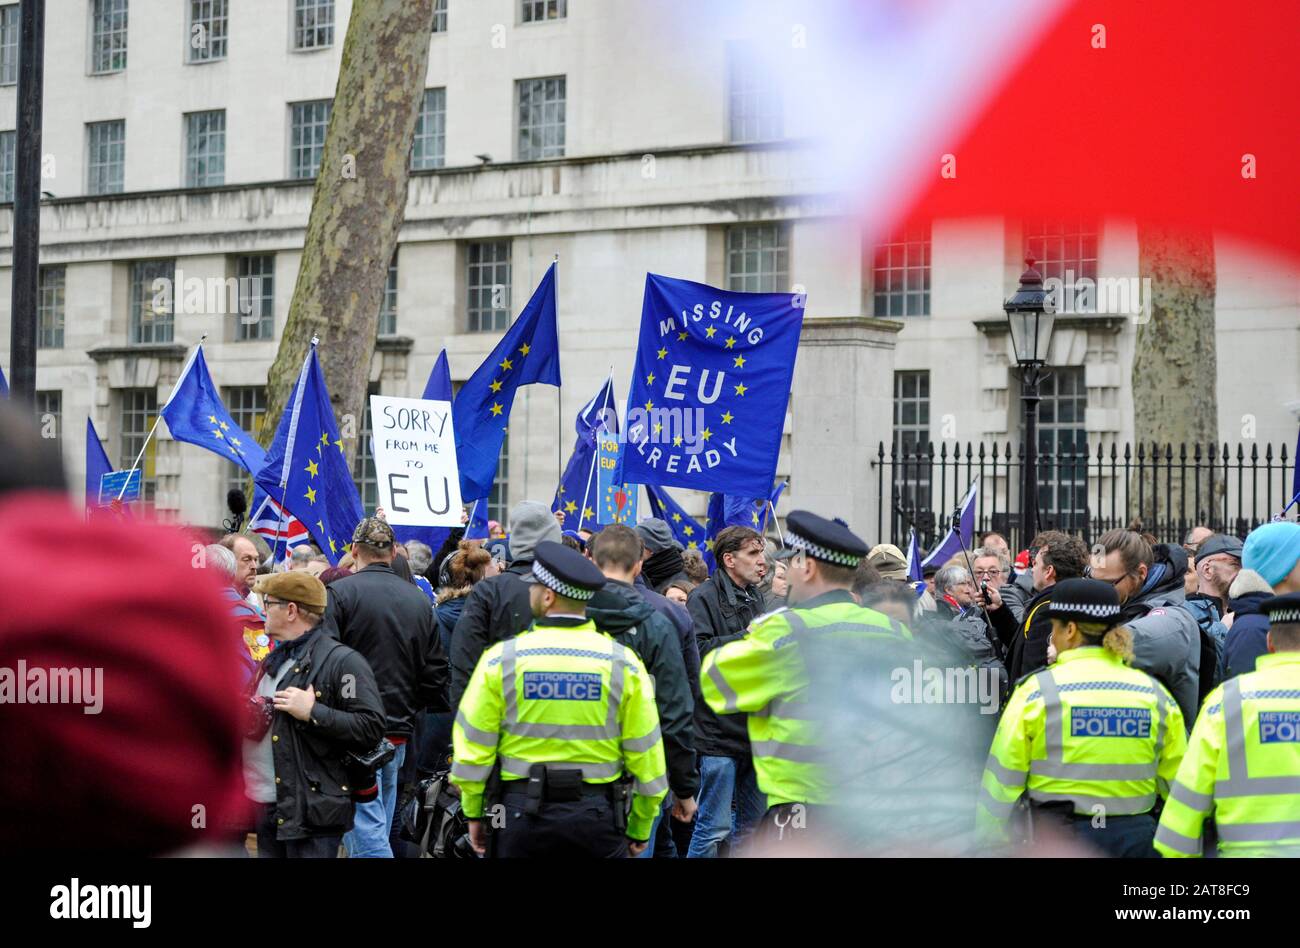 London UK 31st January 2020 - EU supporters gather in Whitehall London as Britain prepares to leave the EU at 11pm later this evening 47 years after joining : Credit Simon Dack / Alamy Live News Stock Photo